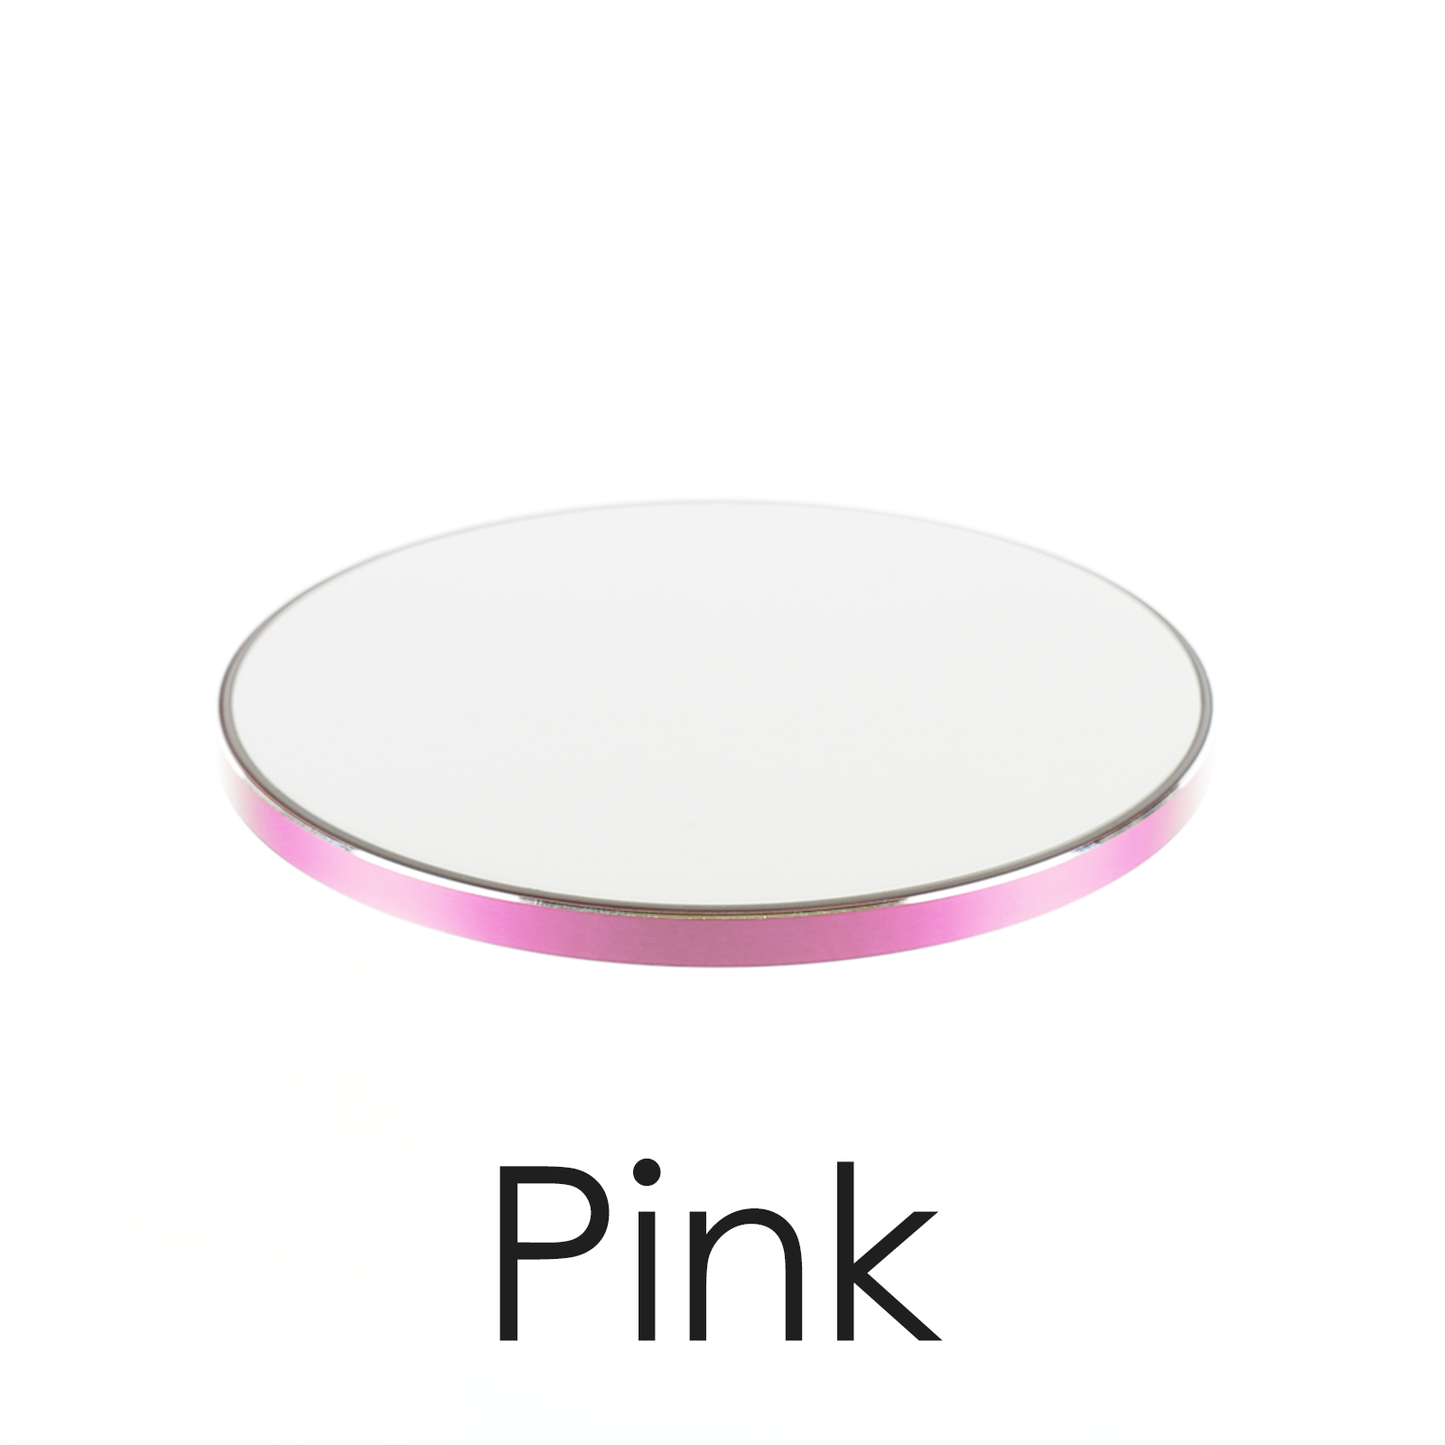 Personalised Wireless Charger with Pink Stylish text, Stars and Hearts on White Marble